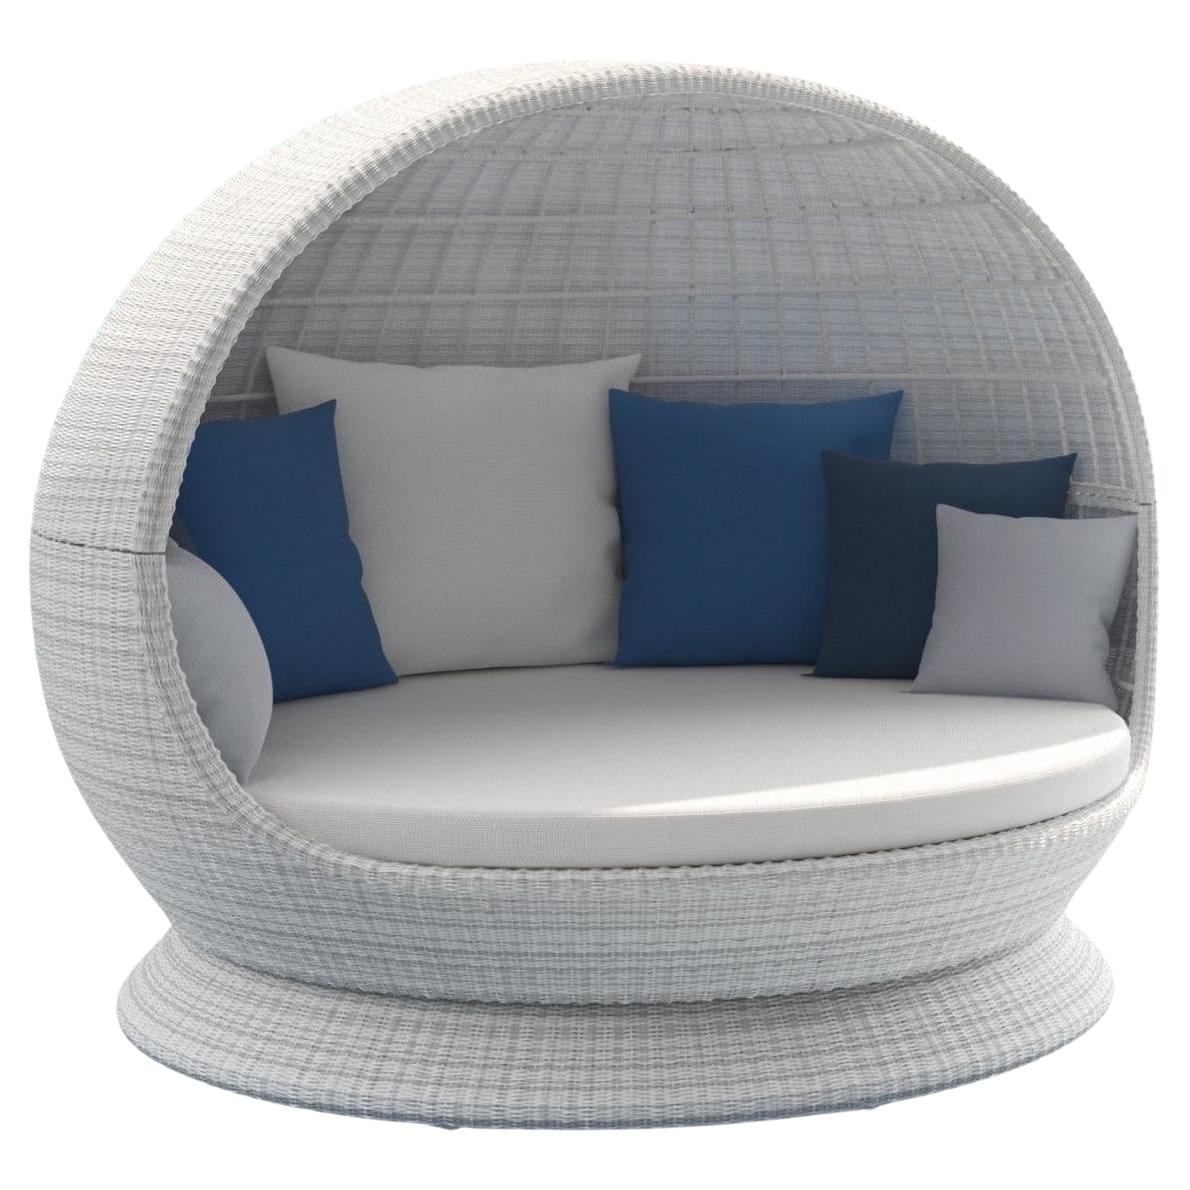  360° Rotating Scoop Daybed In Woven Wicker